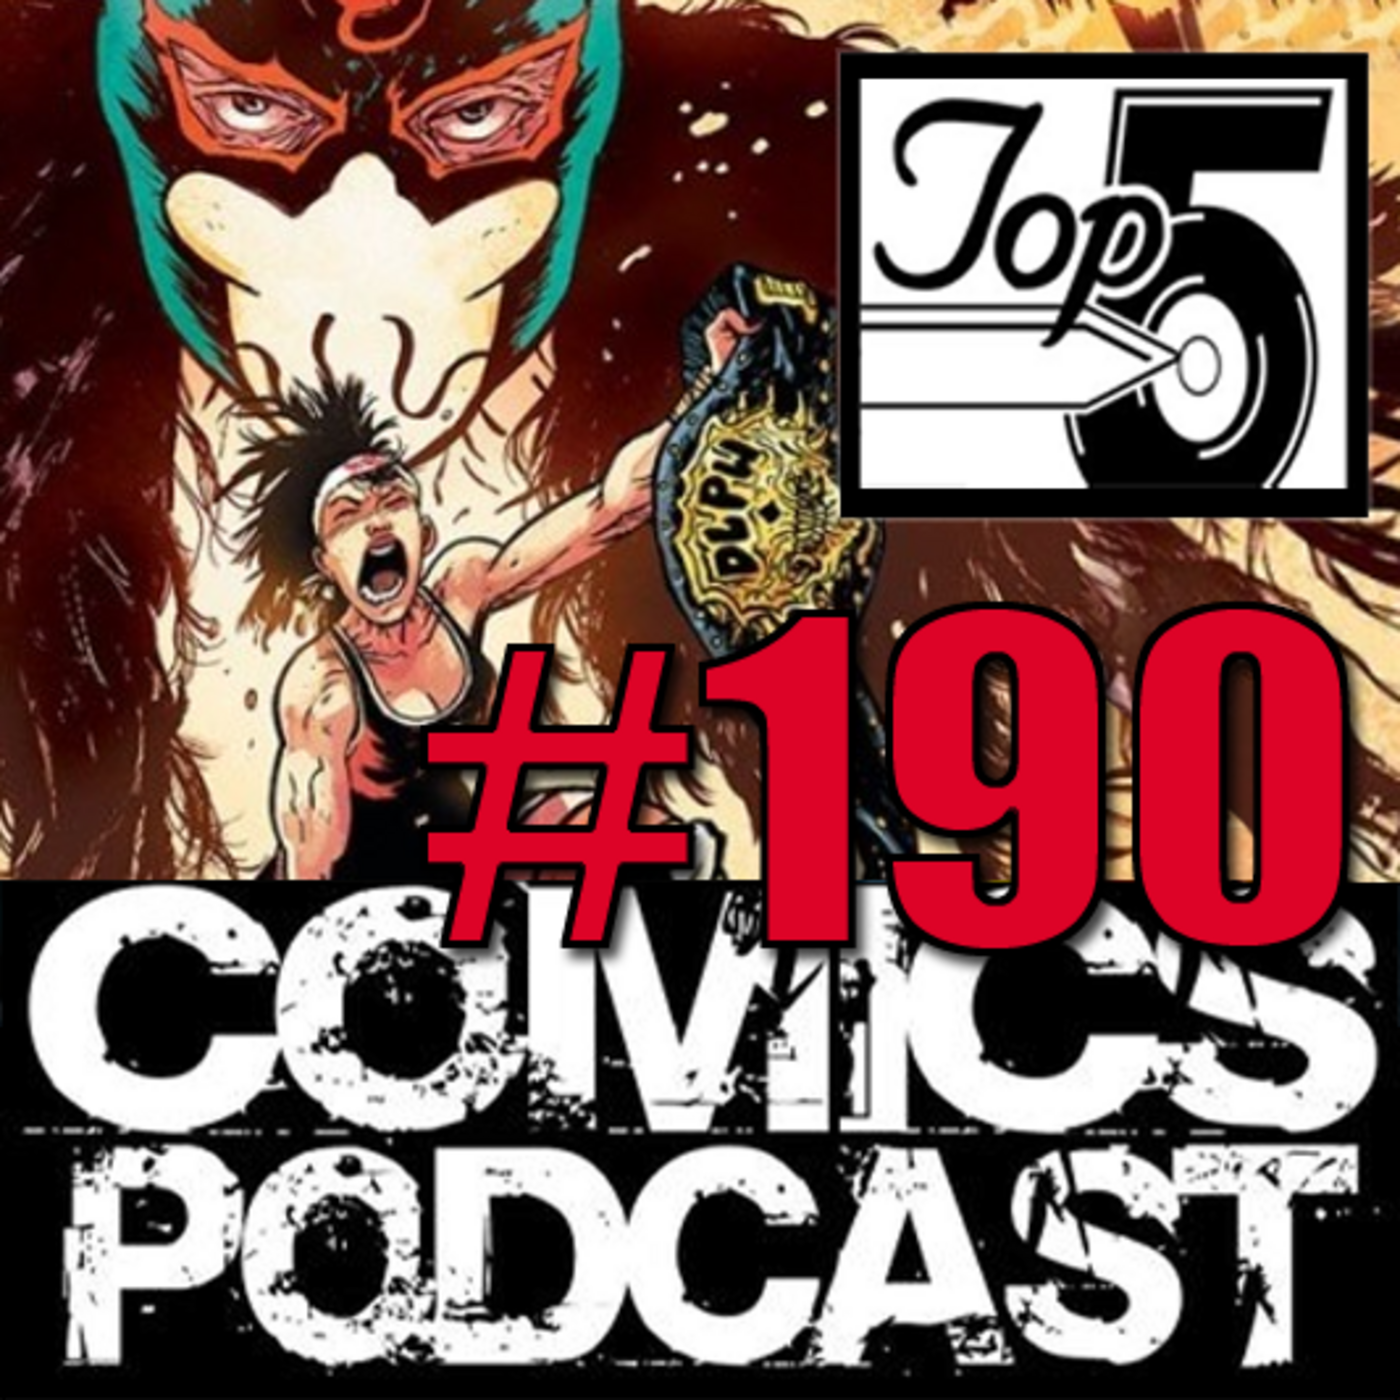 Episode 190: Top 5 Comics Podcast - Episode 190 - Punisher, Do A Powerbomb, Black Adam and interview @ Wonder Con